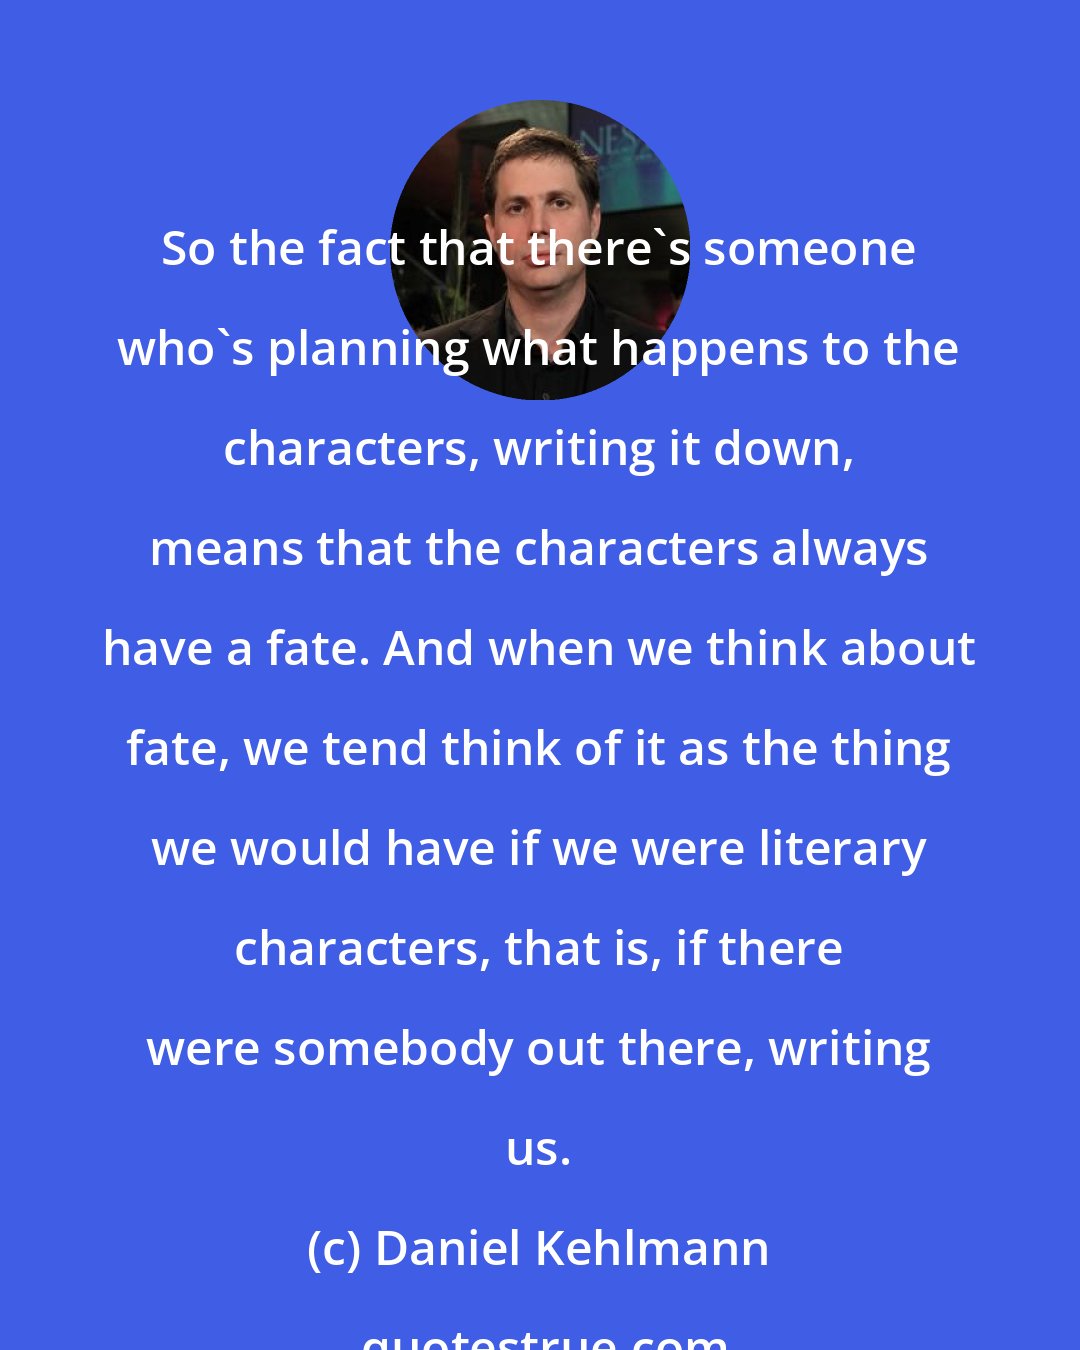 Daniel Kehlmann: So the fact that there's someone who's planning what happens to the characters, writing it down, means that the characters always have a fate. And when we think about fate, we tend think of it as the thing we would have if we were literary characters, that is, if there were somebody out there, writing us.